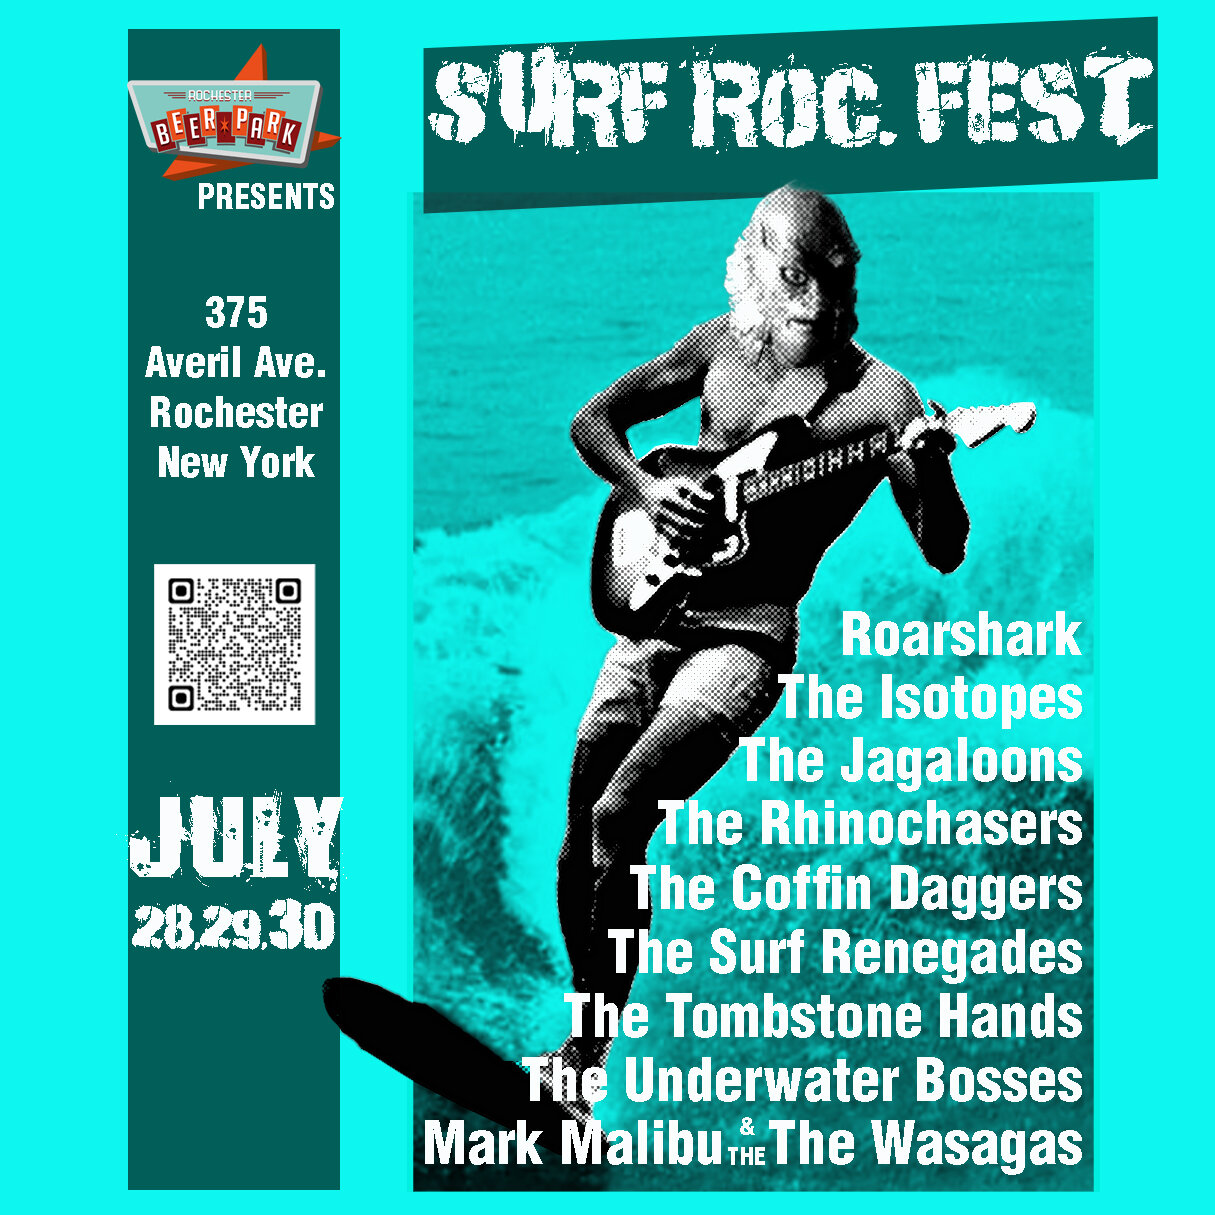 A monster sized musical event is coming your way! The 1st annual Surf Roc. Festival at Rochester Beer Park, July 28 to 30.
https://www.facebook.com/events/540358001397952/ #thecoffindaggers #underwaterbosses #markmalibuandthewasagas #roarshark #theis